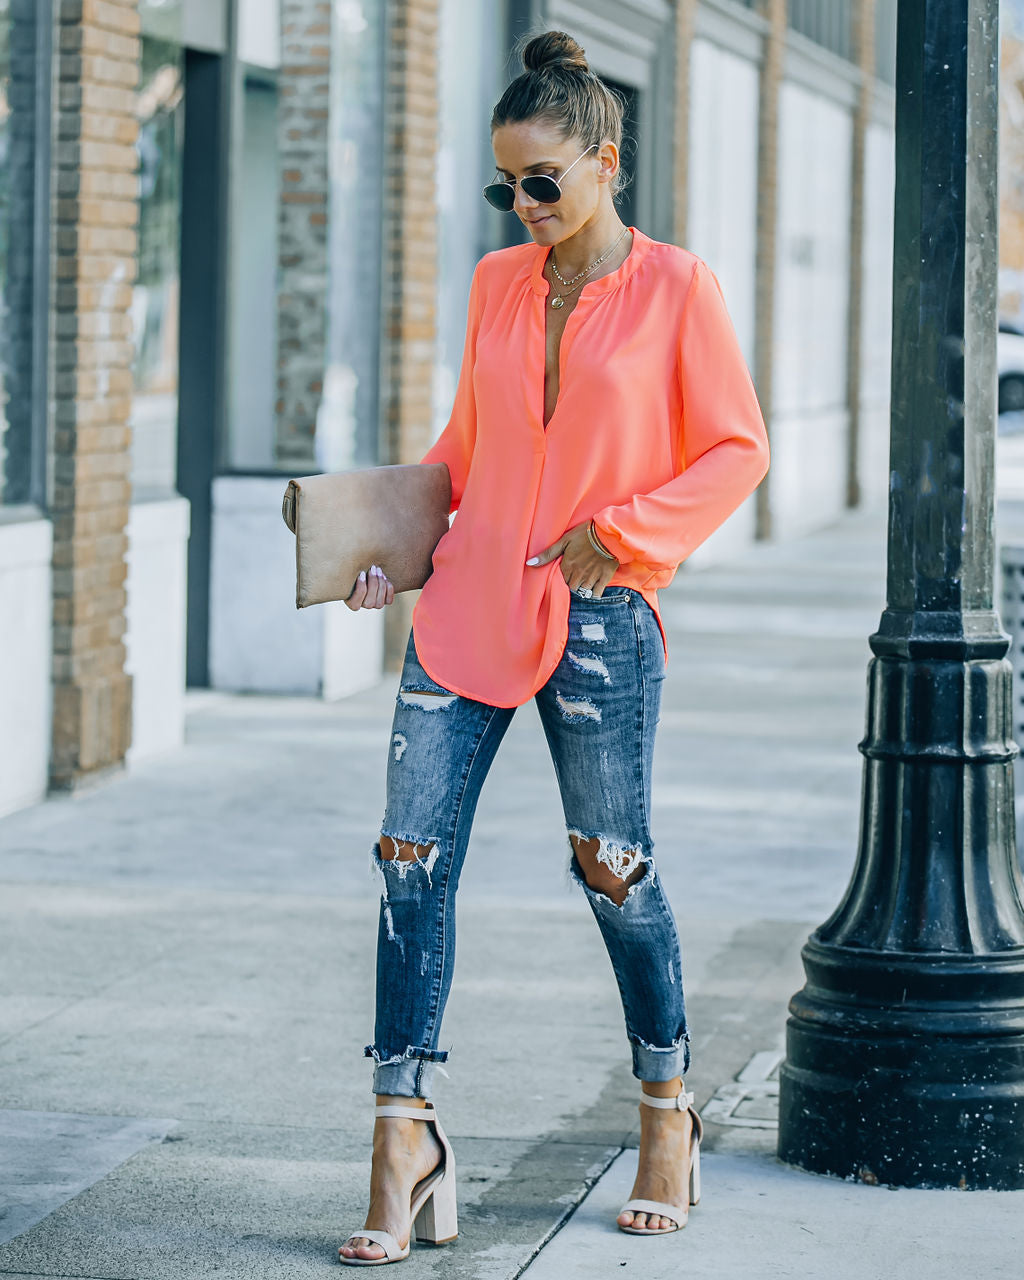 To The Fullest Split Neck Blouse - Coral